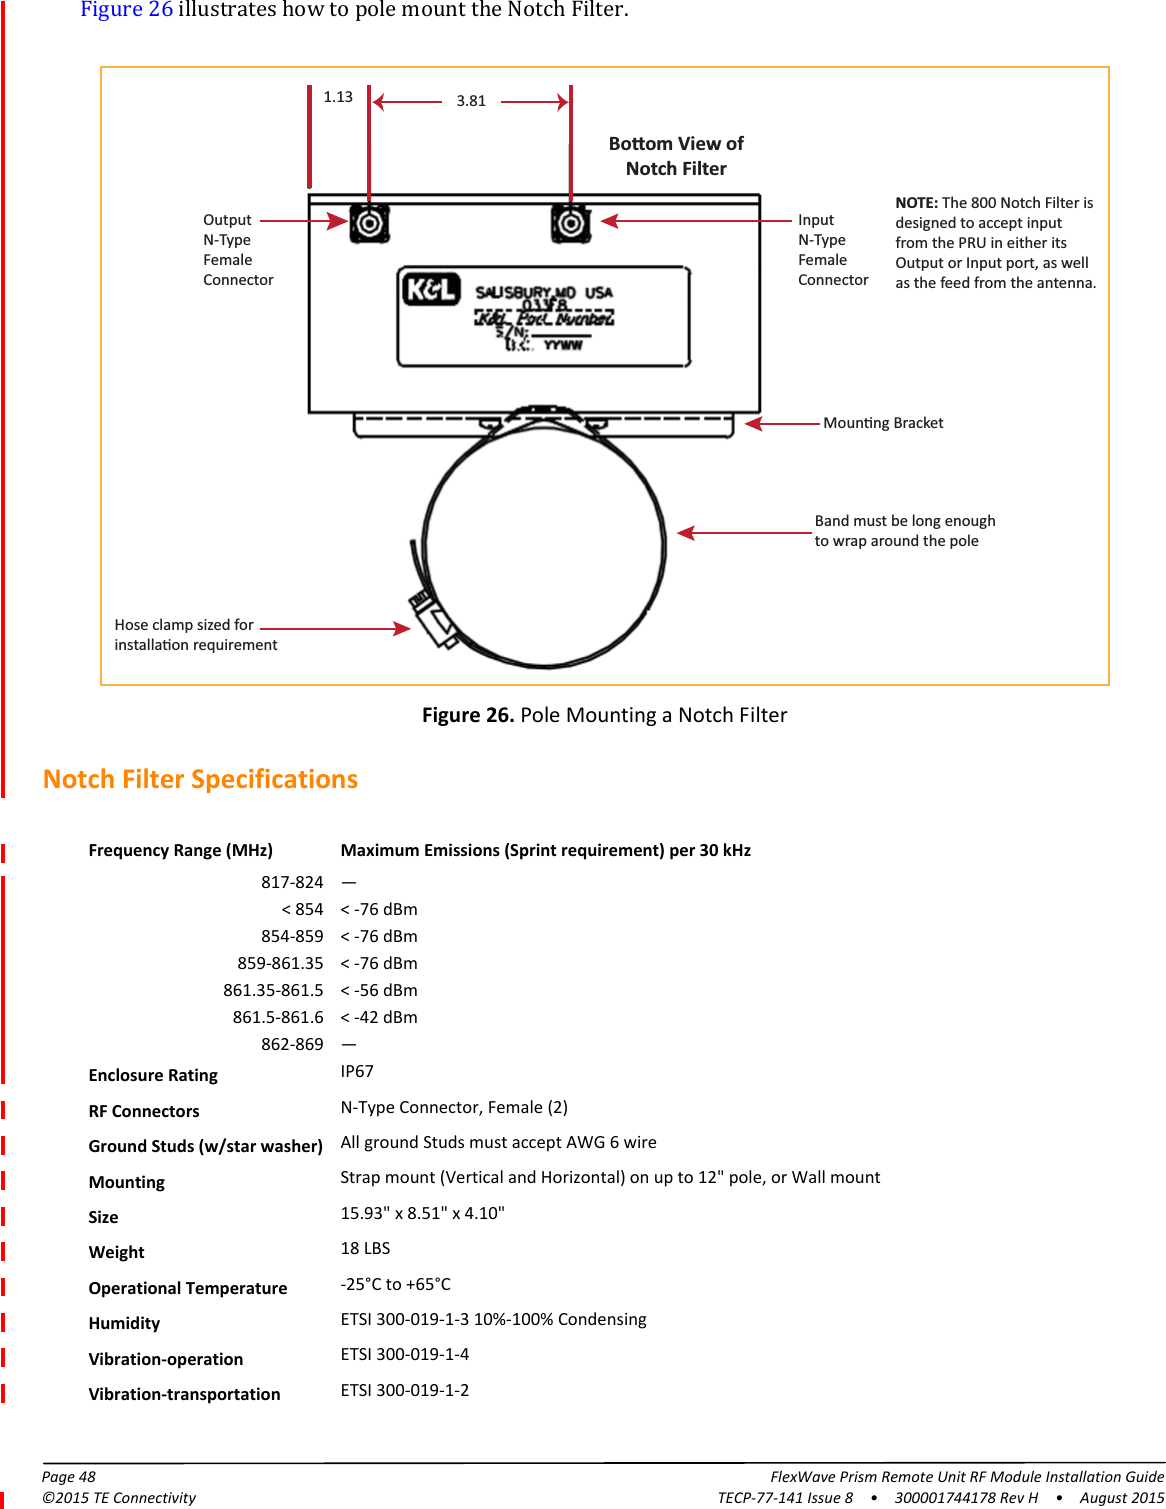 Page 48 FlexWave Prism Remote Unit RF Module Installation Guide©2015 TE Connectivity TECP-77-141 Issue 8  •  300001744178 Rev H  •  August 2015Figure 26 illustrates how to pole mount the Notch Filter.1.13 3.81InputN-TypeFemaleConnectorOutput N-TypeFemaleConnectorBand must be long enoughto wrap around the poleBoom View ofNotch FilterHose clamp sized forinstallaon requirementMounng BracketNOTE: The 800 Notch Filter isdesigned to accept input from the PRU in either itsOutput or Input port, as well as the feed from the antenna.  Figure 26. Pole Mounting a Notch FilterNotch Filter SpecificationsFrequency Range (MHz) Maximum Emissions (Sprint requirement) per 30 kHz817-824 —&lt; 854  &lt; -76 dBm854-859 &lt; -76 dBm859-861.35 &lt; -76 dBm861.35-861.5 &lt; -56 dBm861.5-861.6 &lt; -42 dBm862-869 —Enclosure Rating IP67RF Connectors N-Type Connector, Female (2)Ground Studs (w/star washer) All ground Studs must accept AWG 6 wireMounting Strap mount (Vertical and Horizontal) on up to 12&quot; pole, or Wall mountSize 15.93&quot; x 8.51&quot; x 4.10&quot;Weight 18 LBSOperational Temperature -25°C to +65°CHumidity ETSI 300-019-1-3 10%-100% CondensingVibration-operation ETSI 300-019-1-4Vibration-transportation ETSI 300-019-1-2